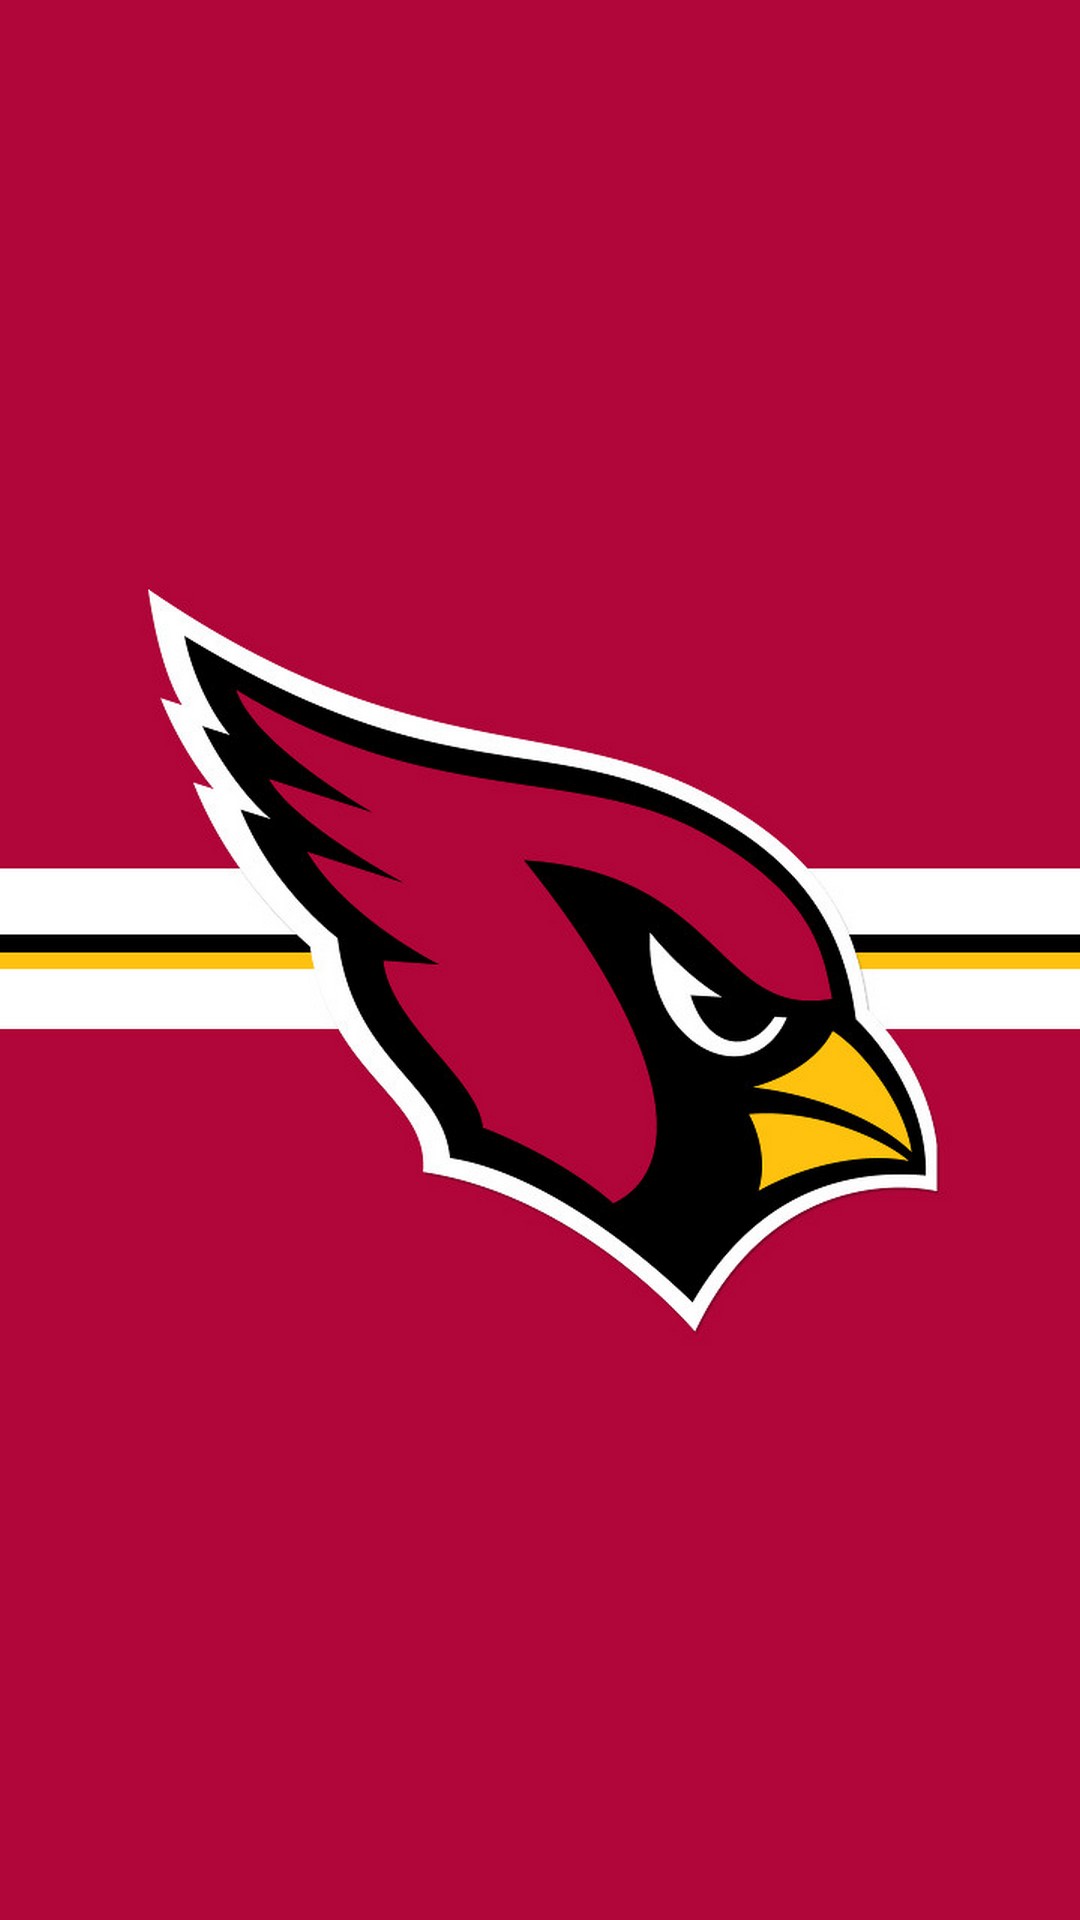 Arizona Cardinals iPhone Lock Screen Wallpaper With high-resolution 1080X1920 pixel. Donwload and set as wallpaper for your iPhone X, iPhone XS home screen backgrounds, XS Max, XR, iPhone8 lock screen wallpaper, iPhone 7, 6, SE, and other mobile devices